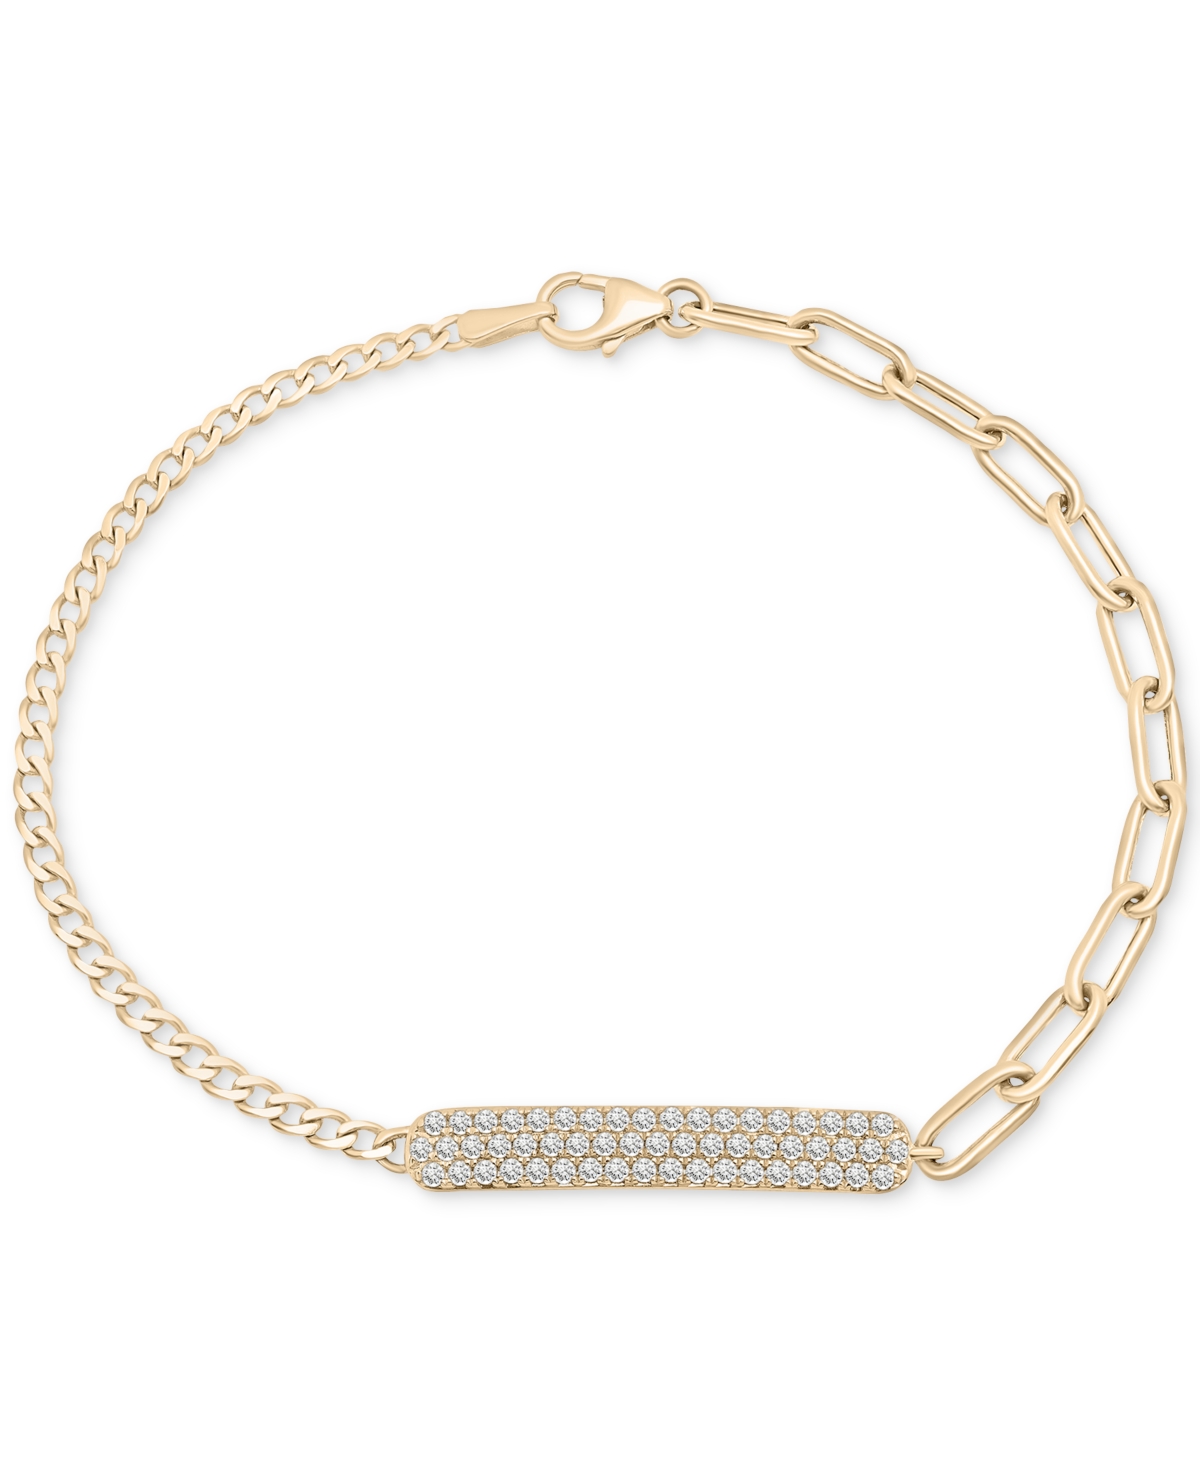 Diamond Bar Two-Chain Link Bracelet (1/2 ct. t.w.) in Gold Vermeil, Created for Macy's - Gold Vermeil